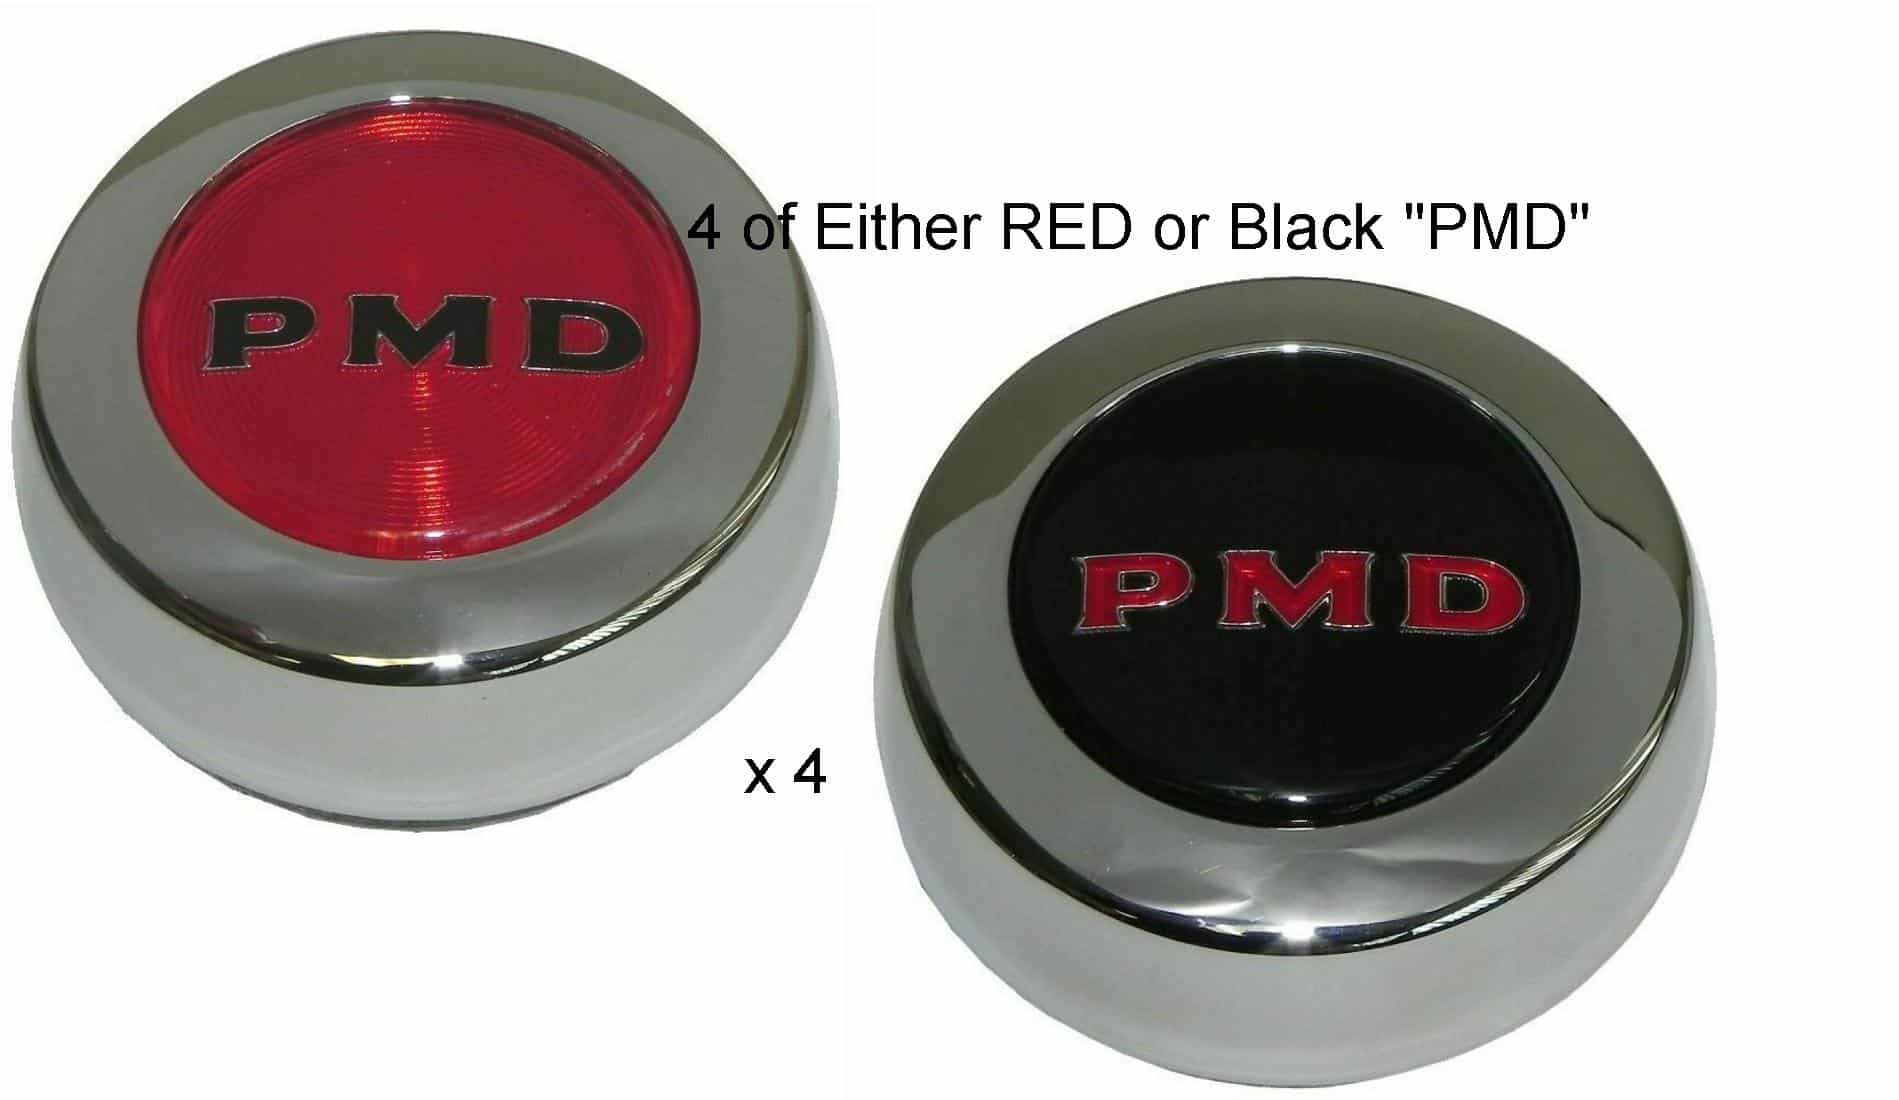 Rally II Center Cap Set: "PMD" Black or Red (4)